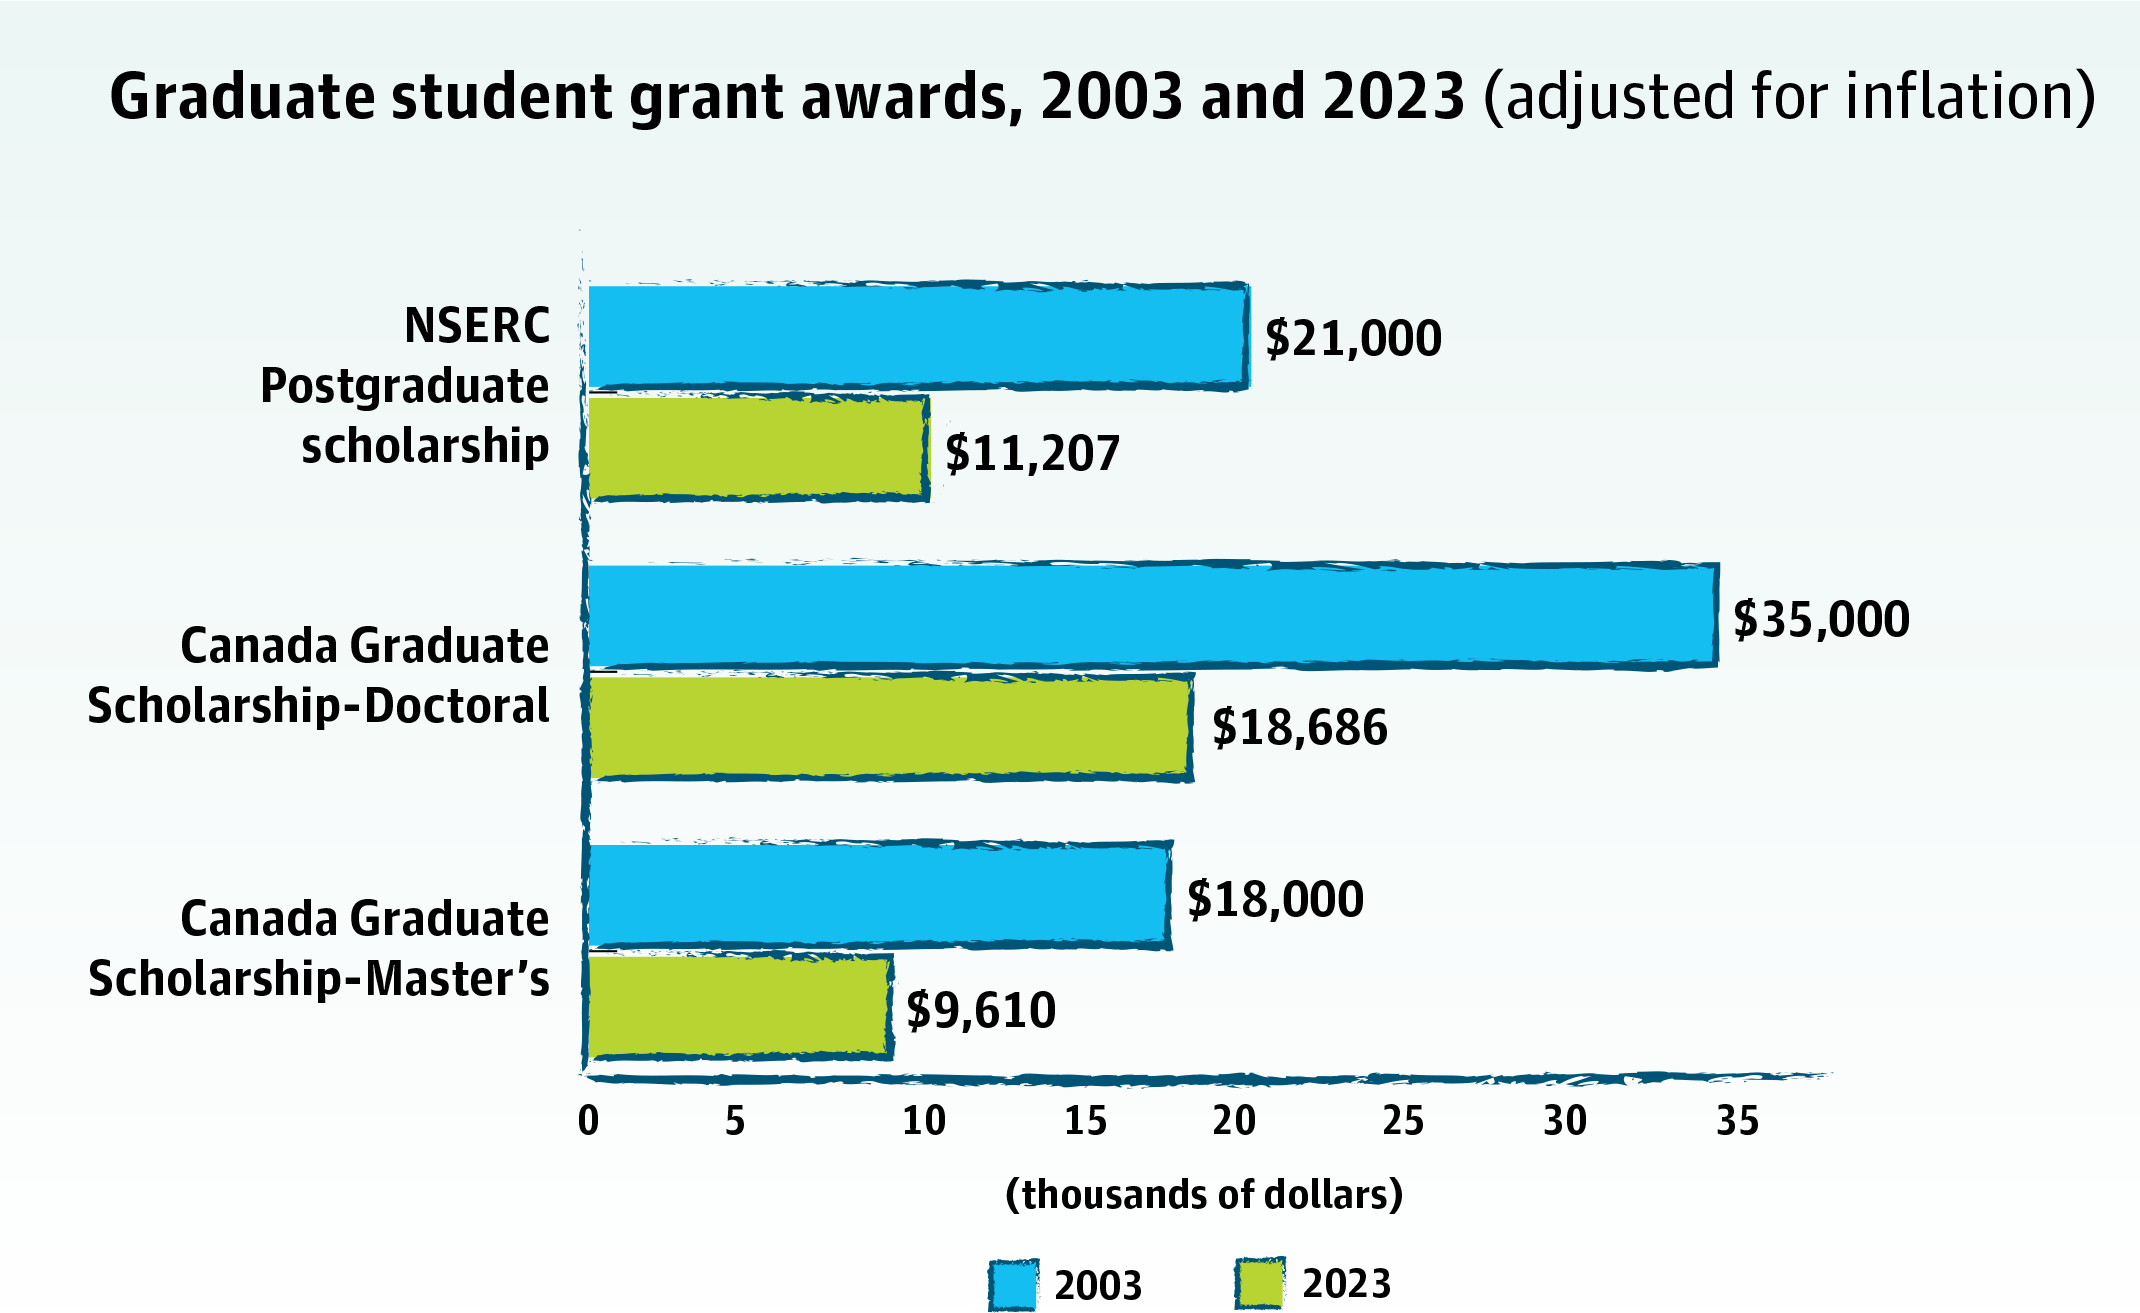 Graduate student grant awards, 2003 and 2023 (adjusted for inflation)